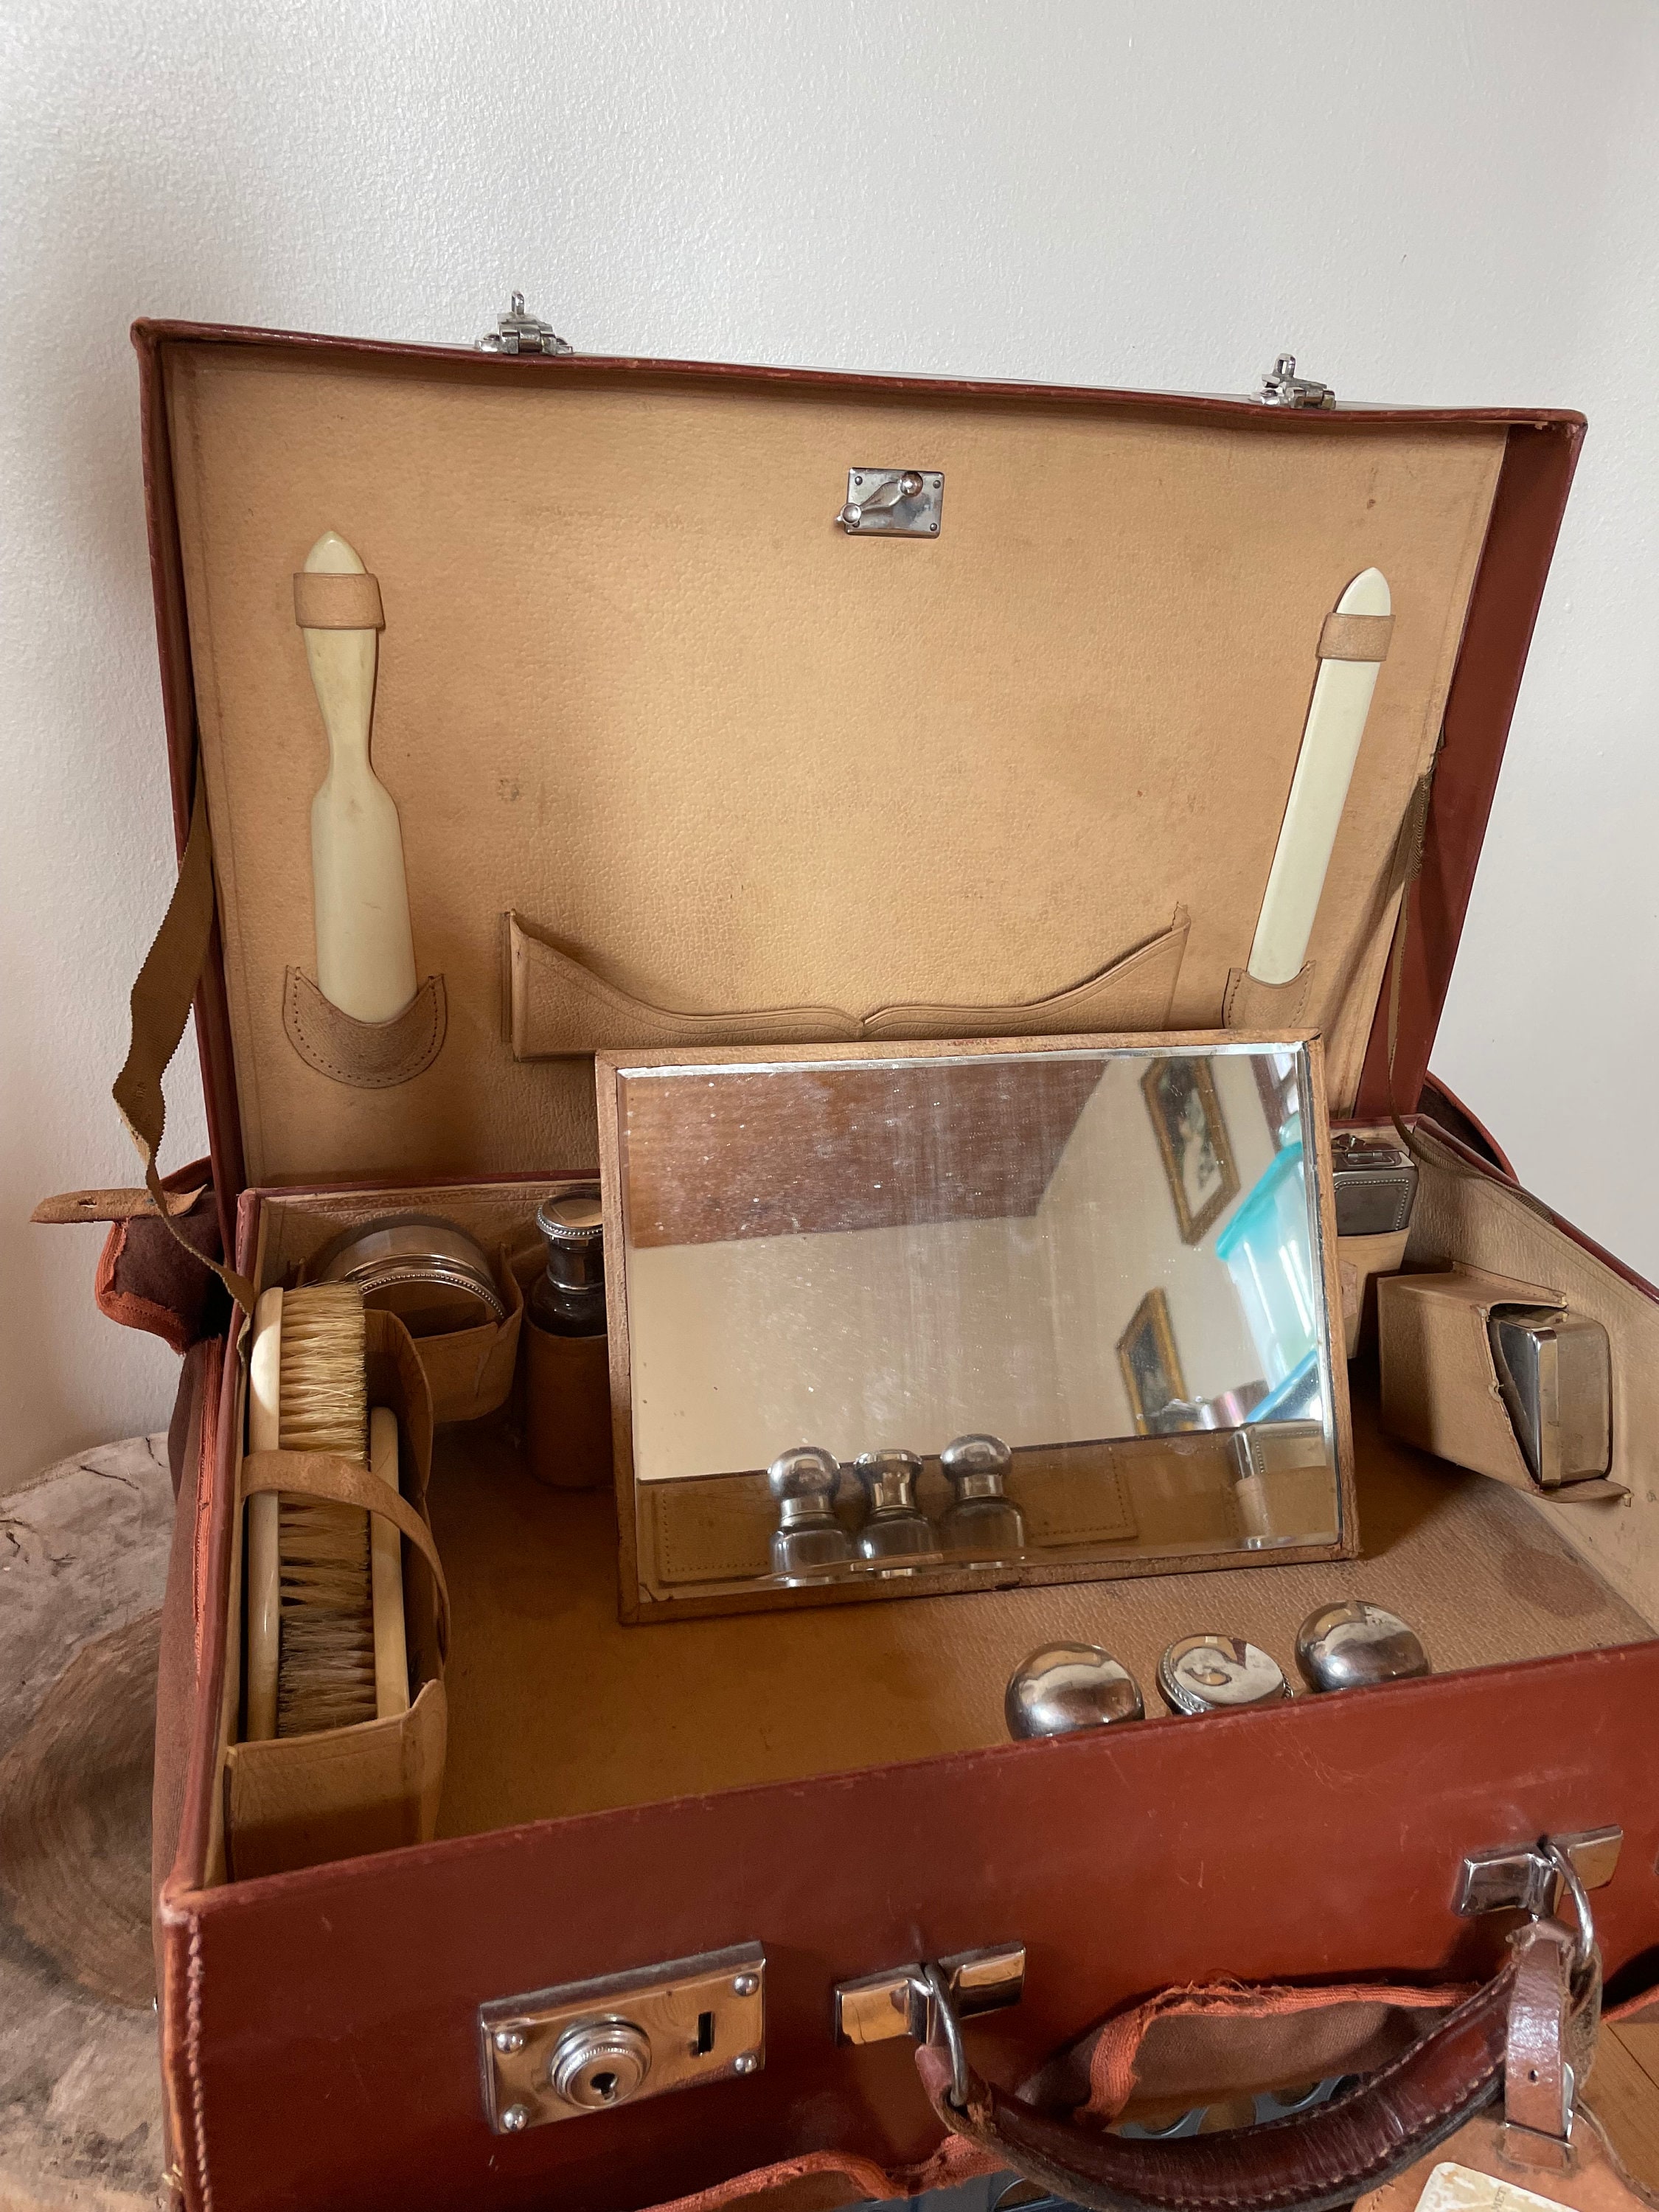 French Vintage Vanity Case With Accessories. Vintage Travel